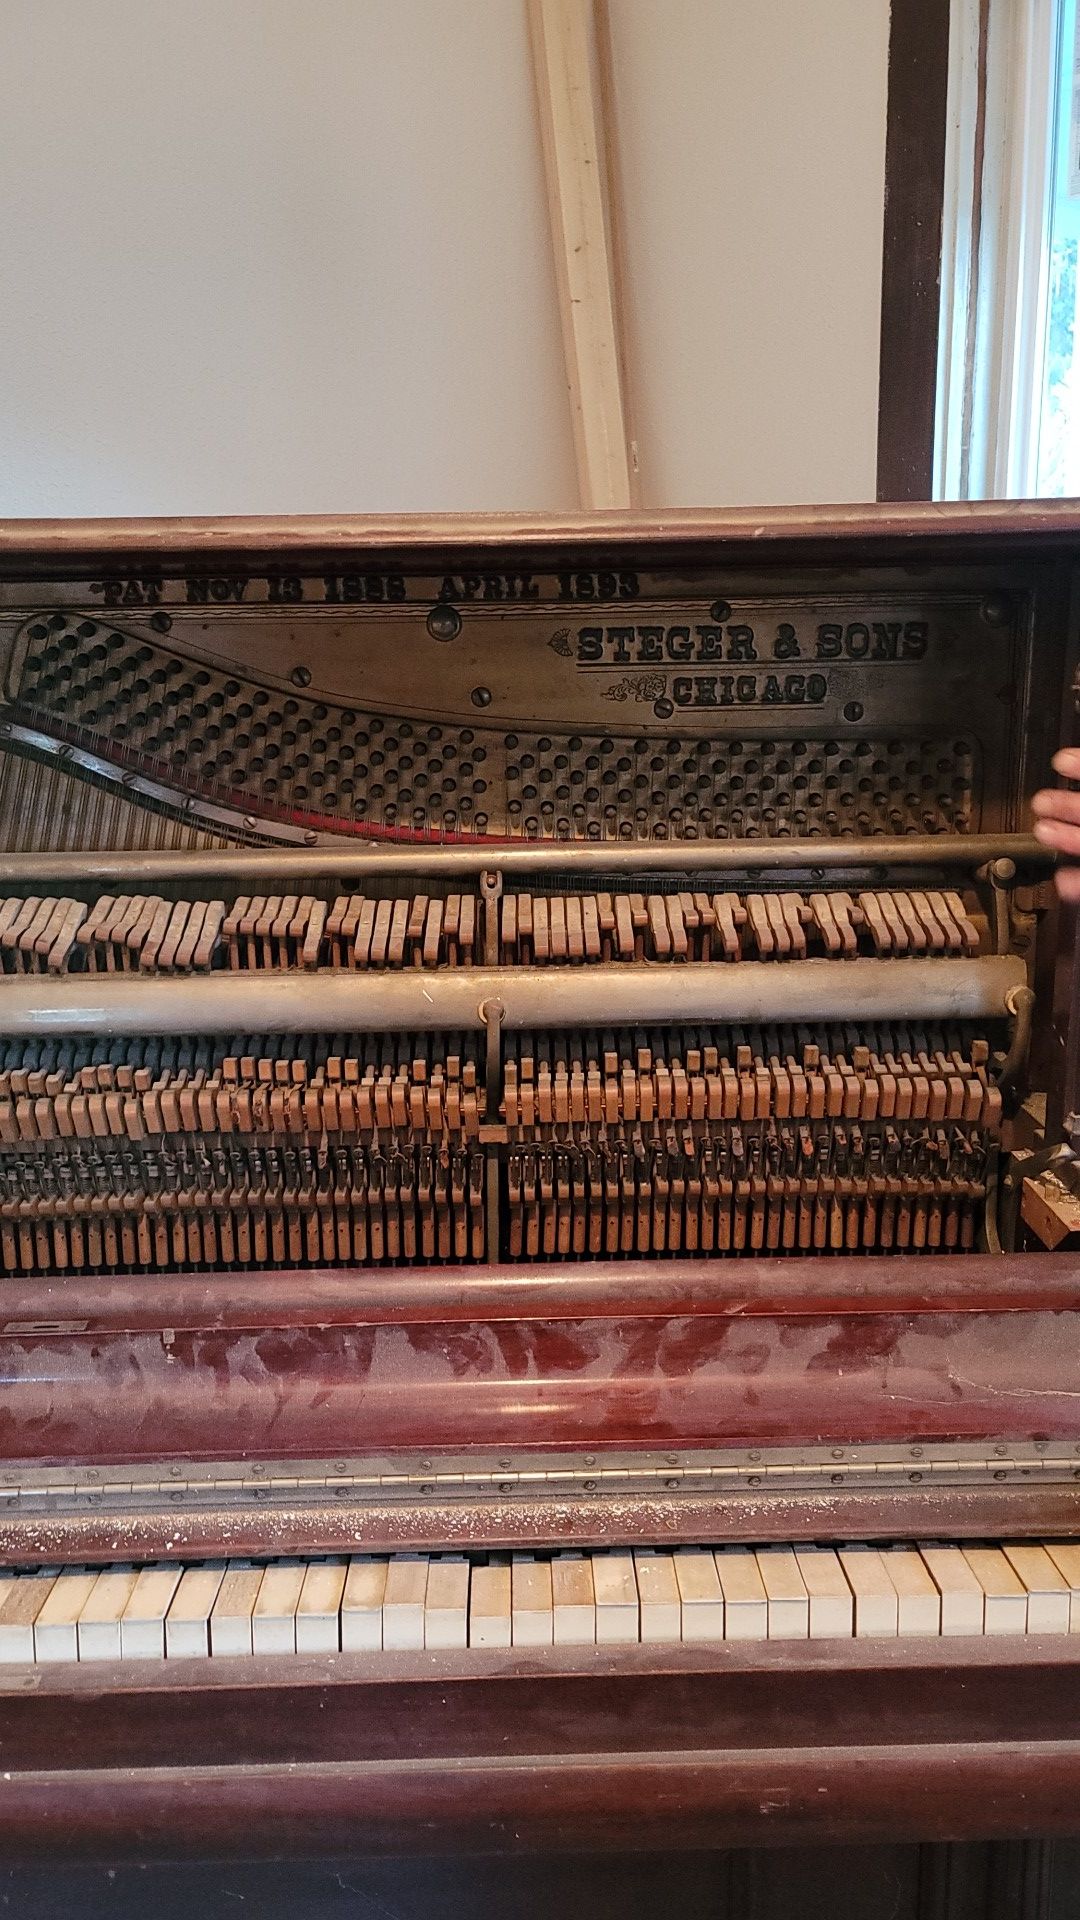 Steger & sons piano